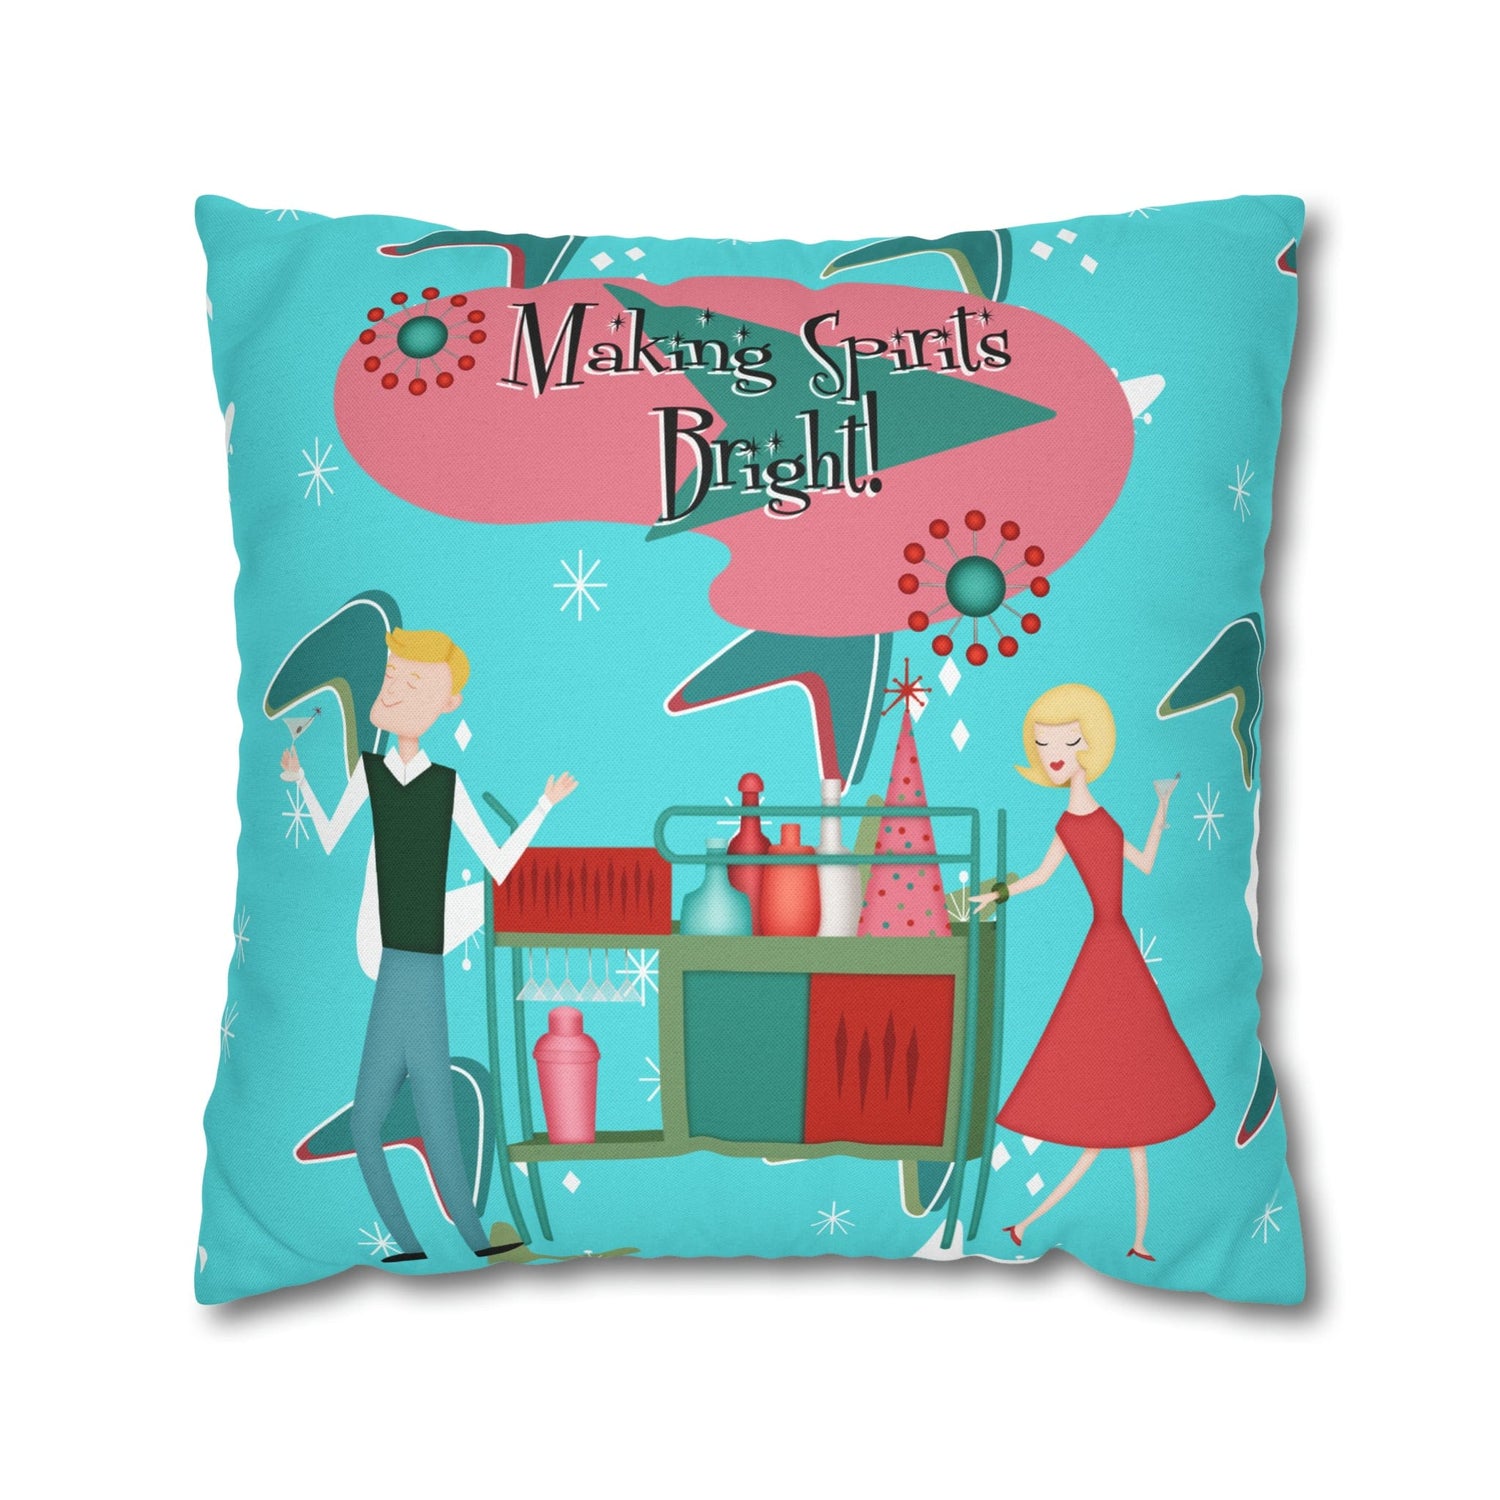 Mid Century Modern Christmas, Making the Spirits Brighter, Atomic Cocktail Kitschy Holiday Christmas Pillow Case Home Decor